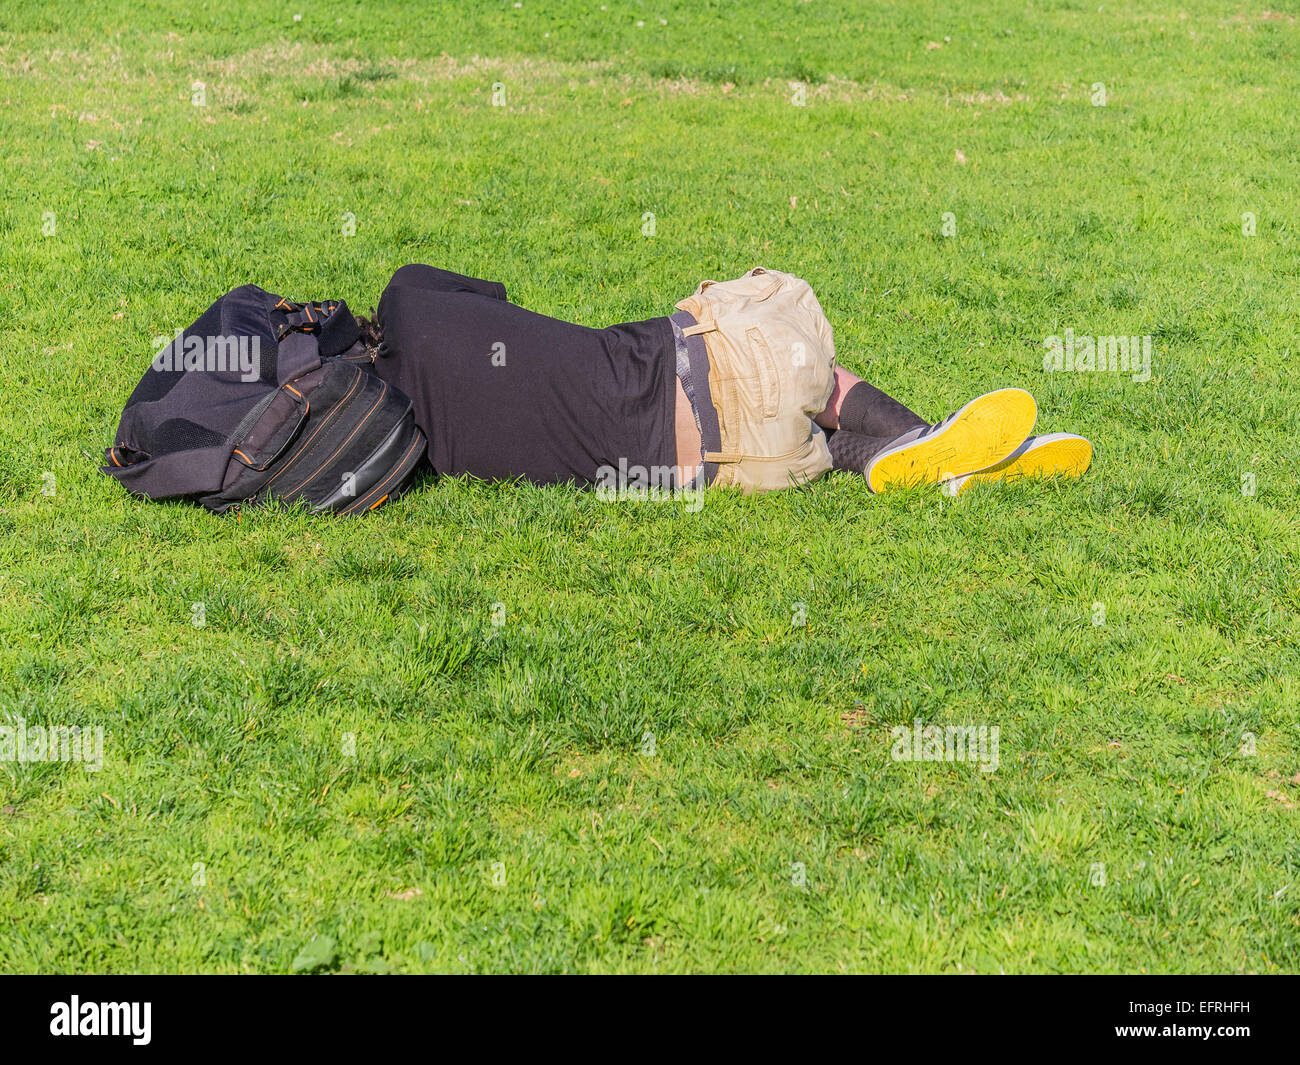 A young homeless man with bright yellow soles on his shoes sleeps lying down outside on the green grass. Stock Photo